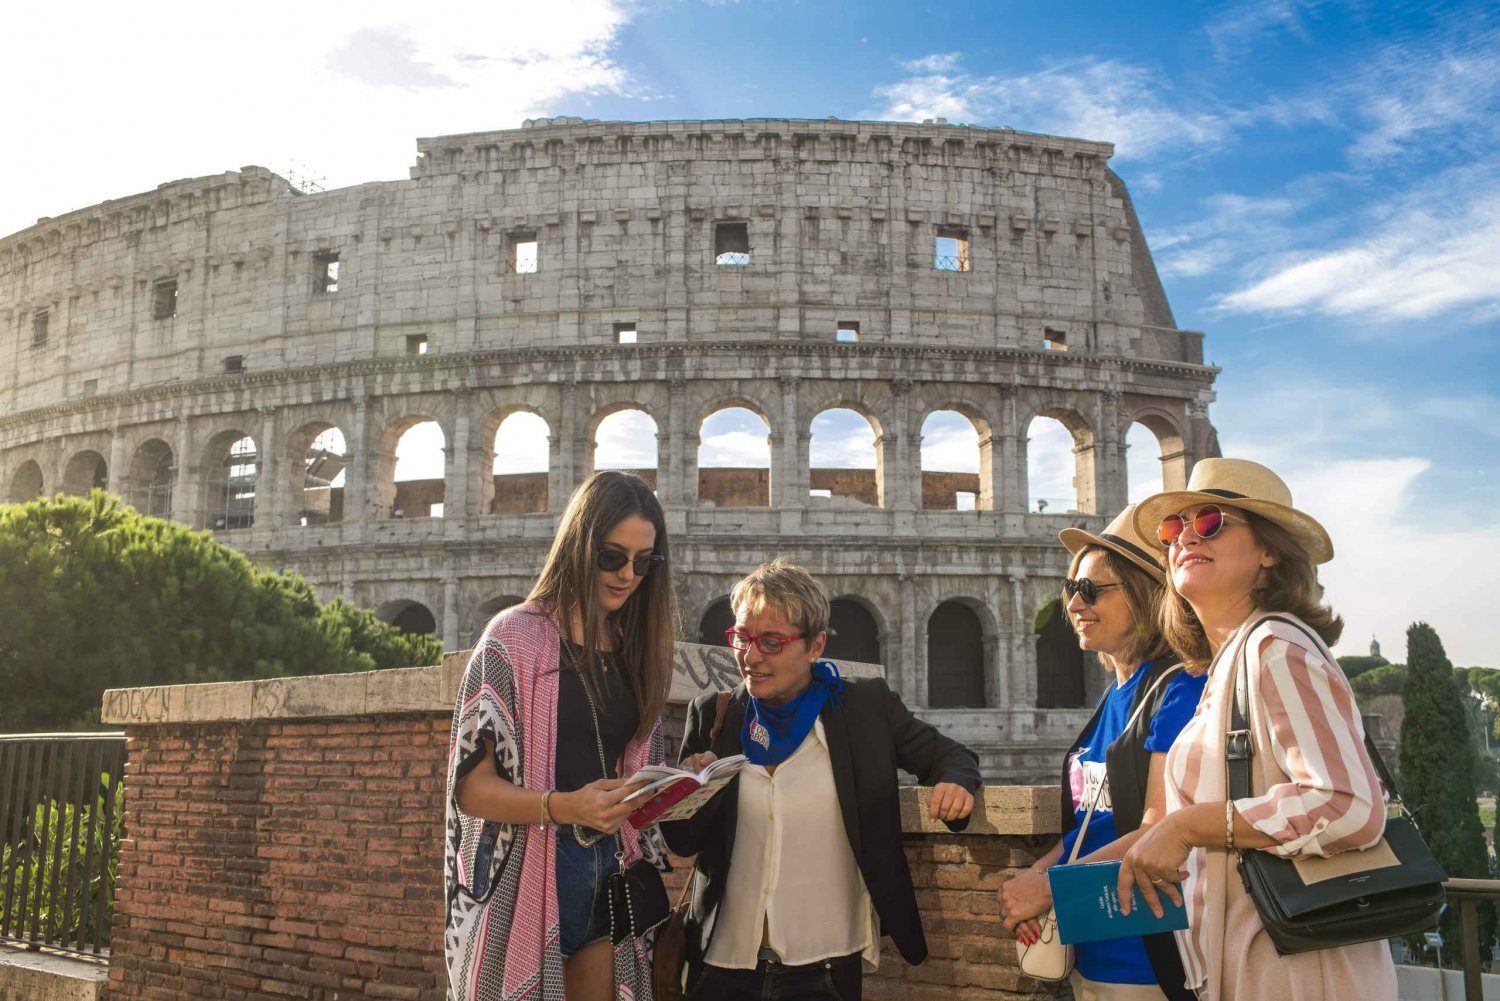 Rome: Colosseum Arena, Forum & Palatine Hill Guided Tour